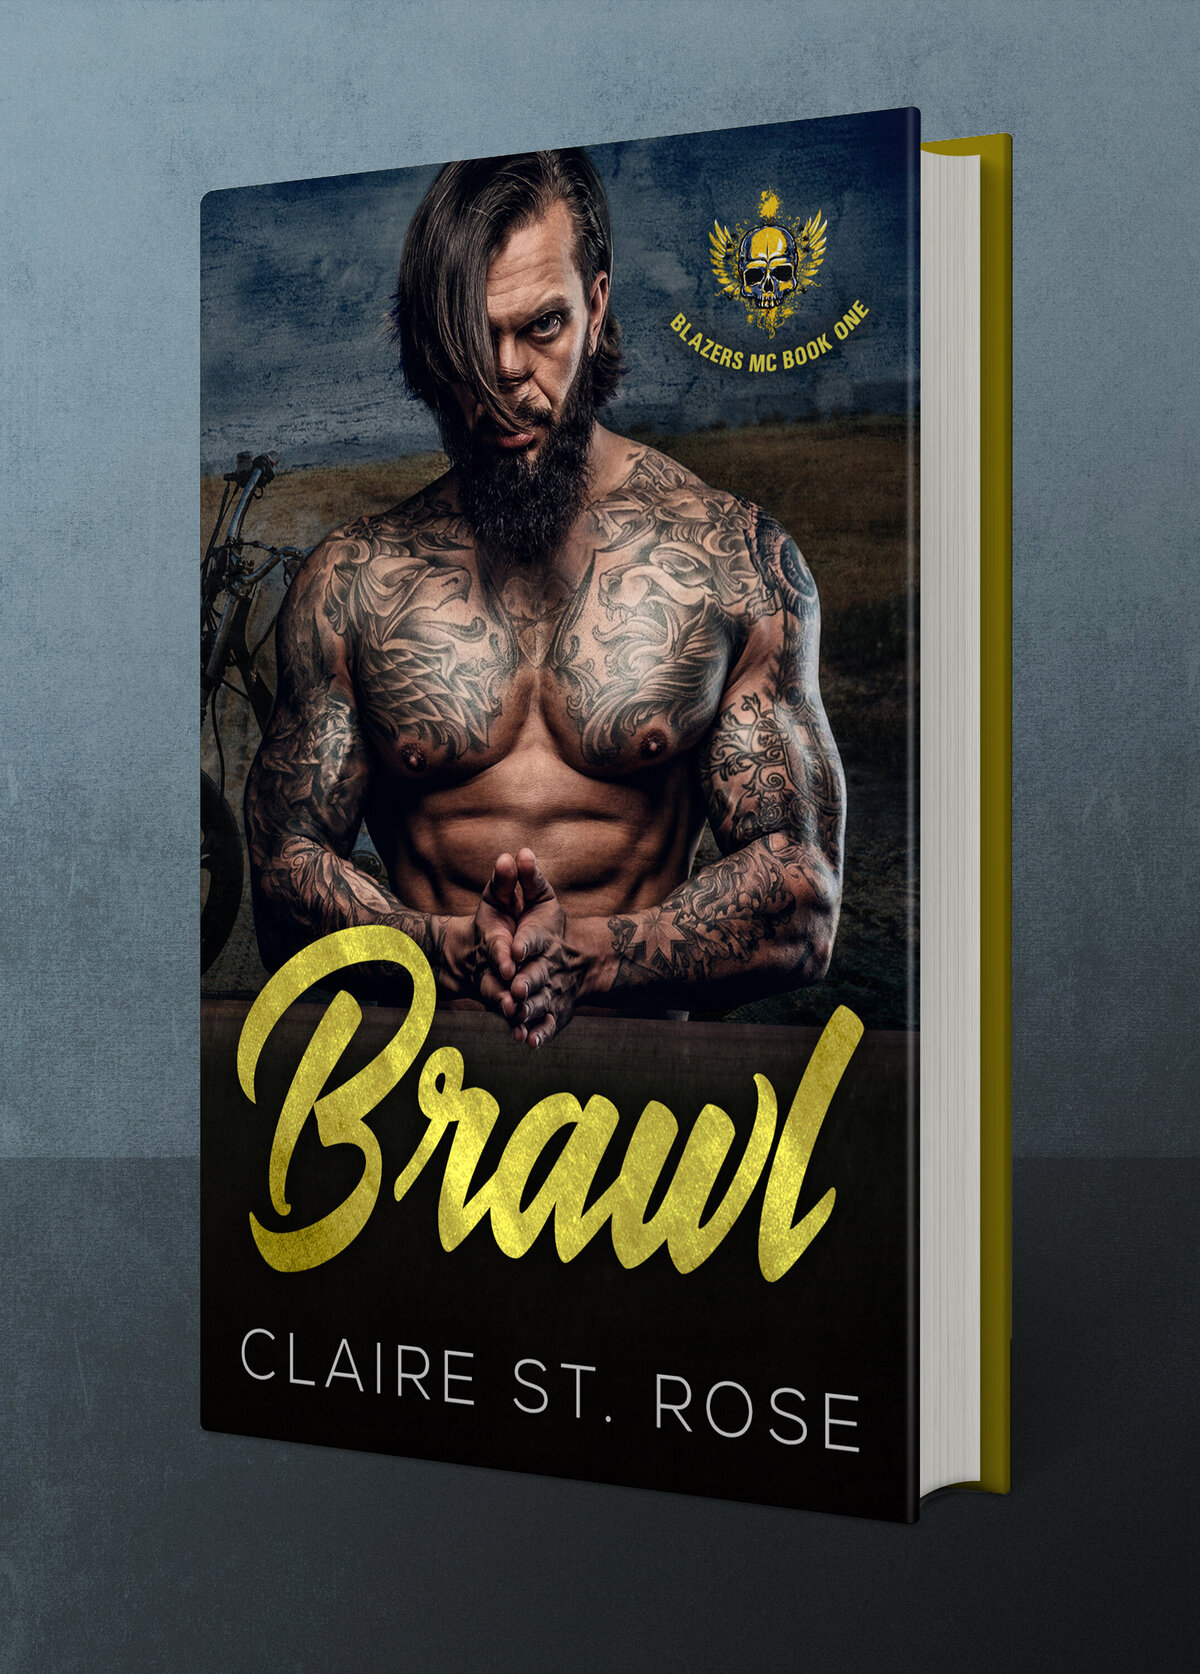 Brawl by Claire St. Rose